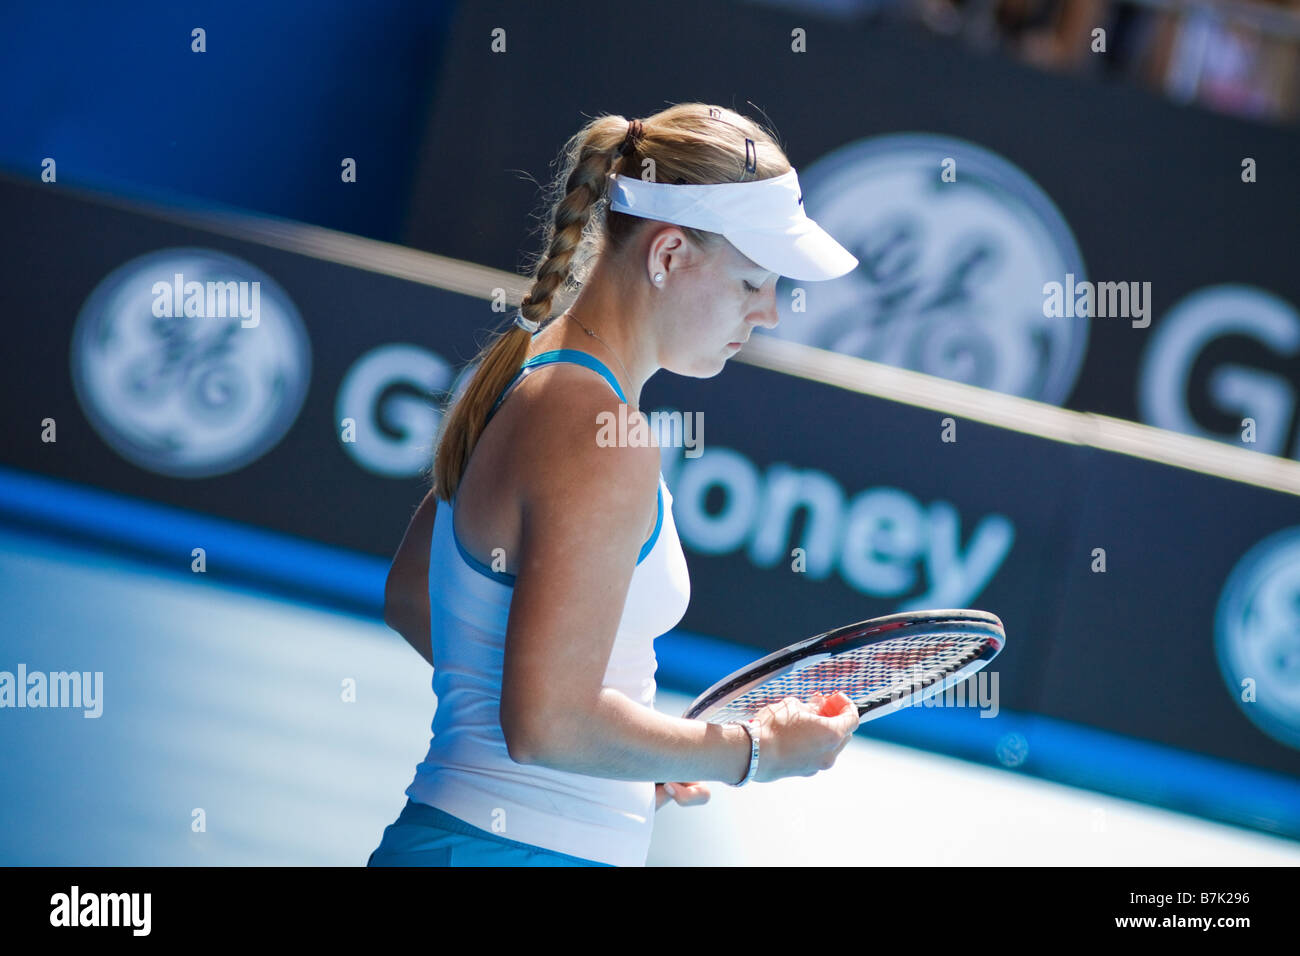 Tennis player Angelique Kerber at the Australian Open on January 20, 2009 in Melbourne Australia. Stock Photo